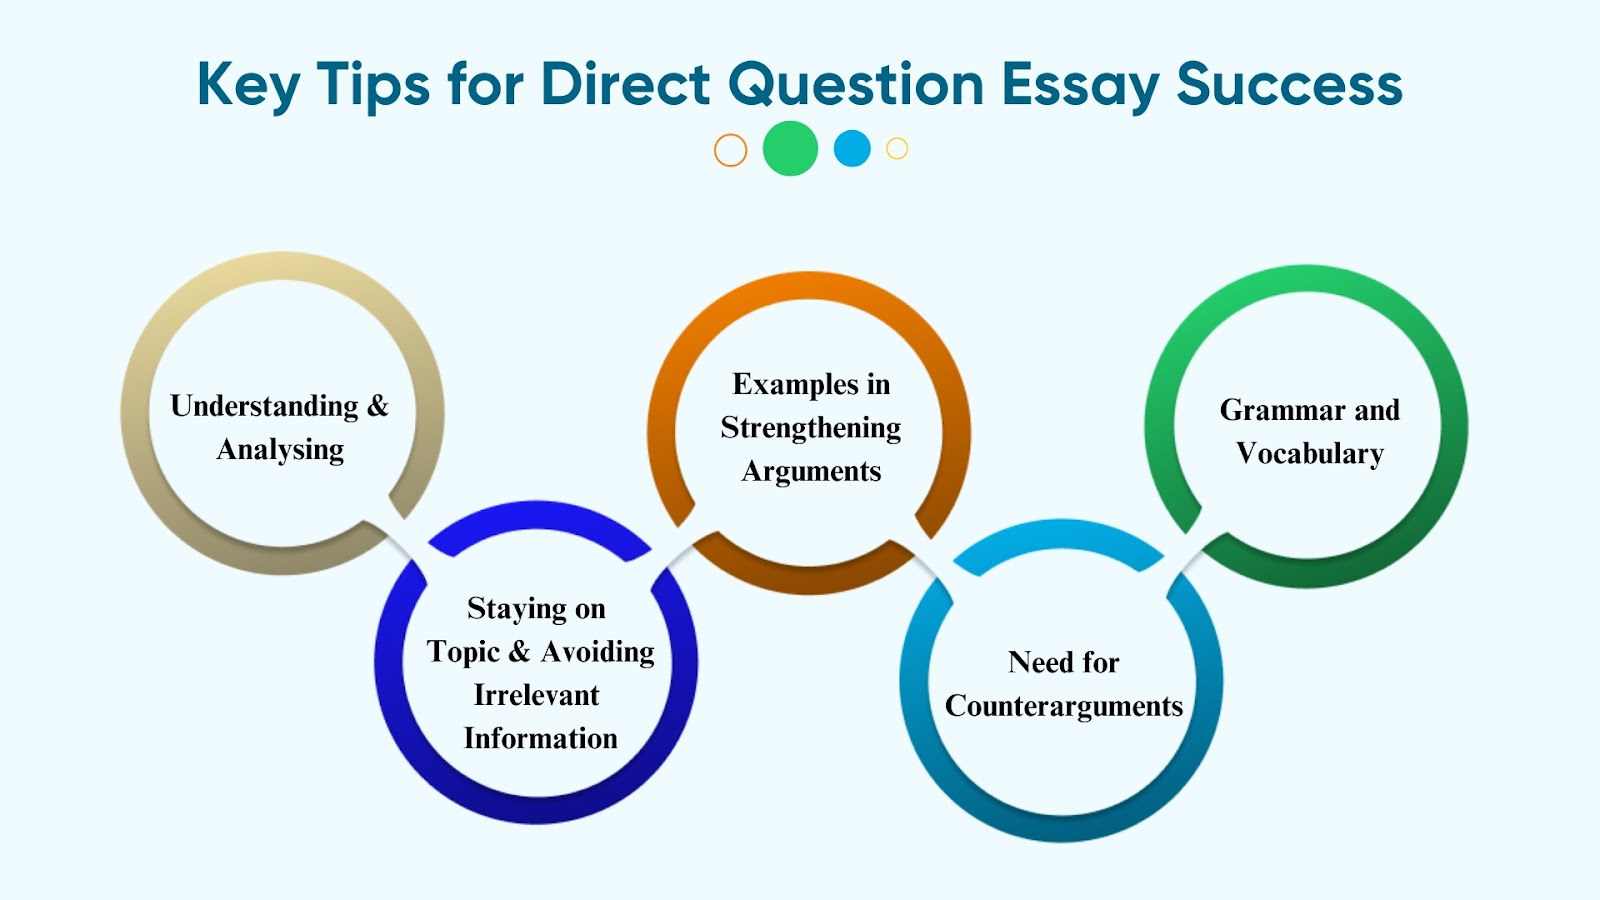 Direct Question Essay in IELTS: Structure and Examples